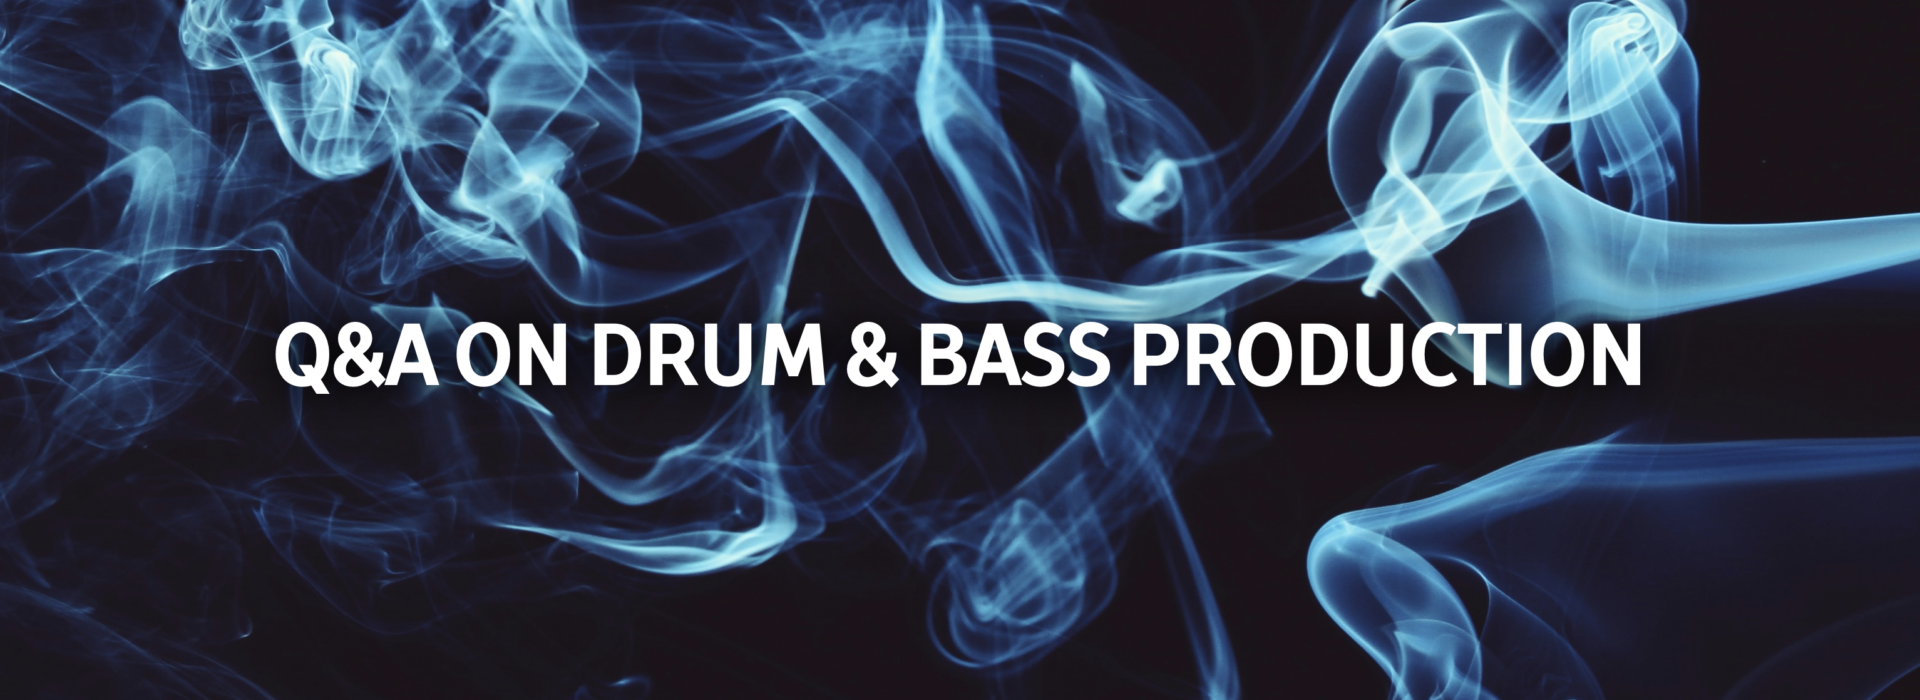 Q&A on Drum & Bass Production